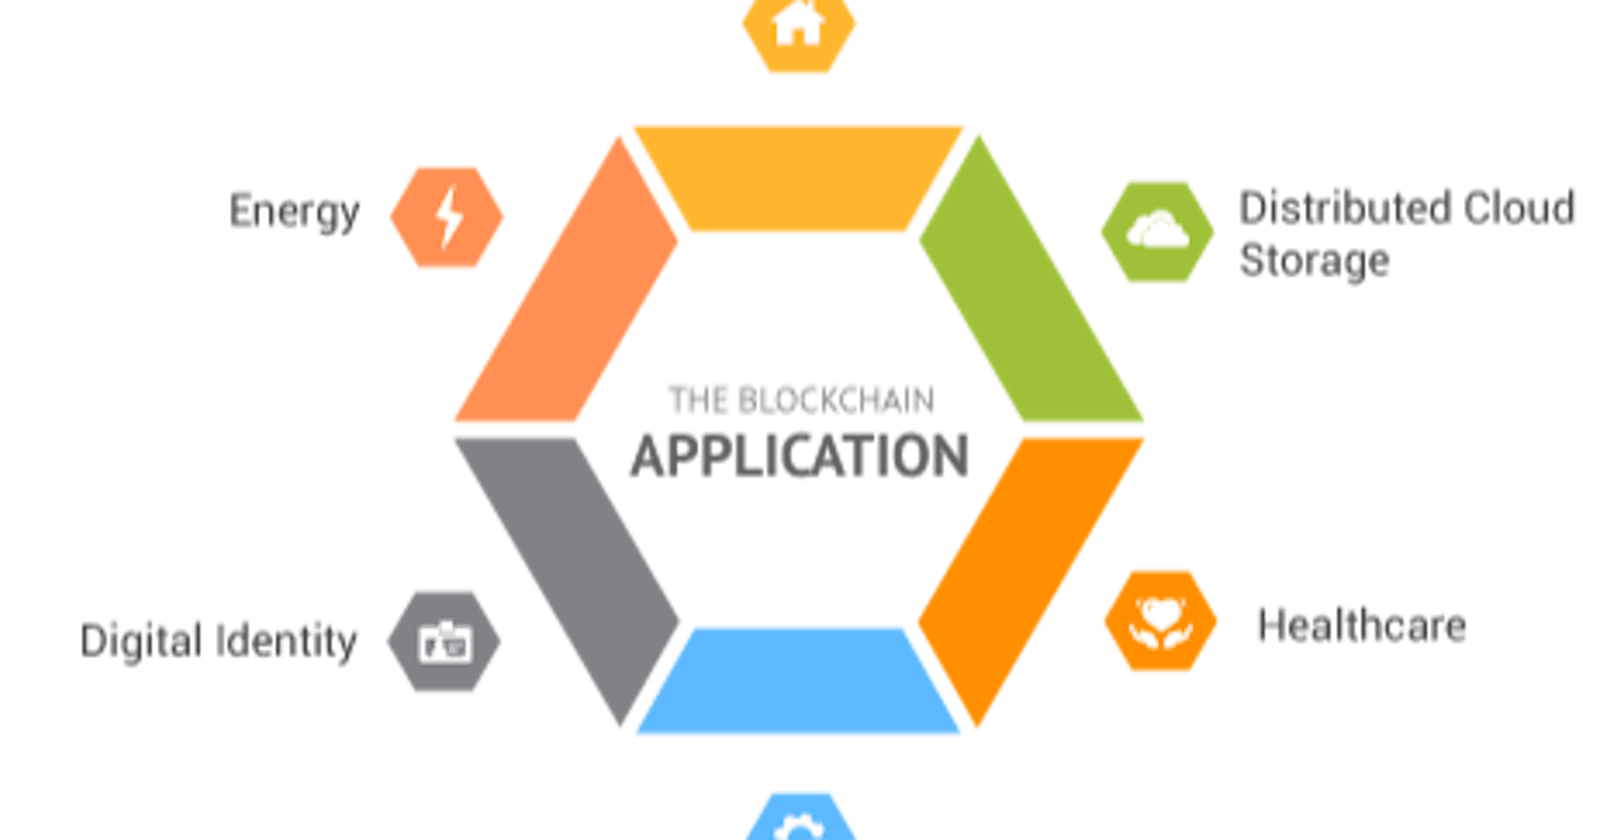 Blockchain Applications and Potential Across Industries